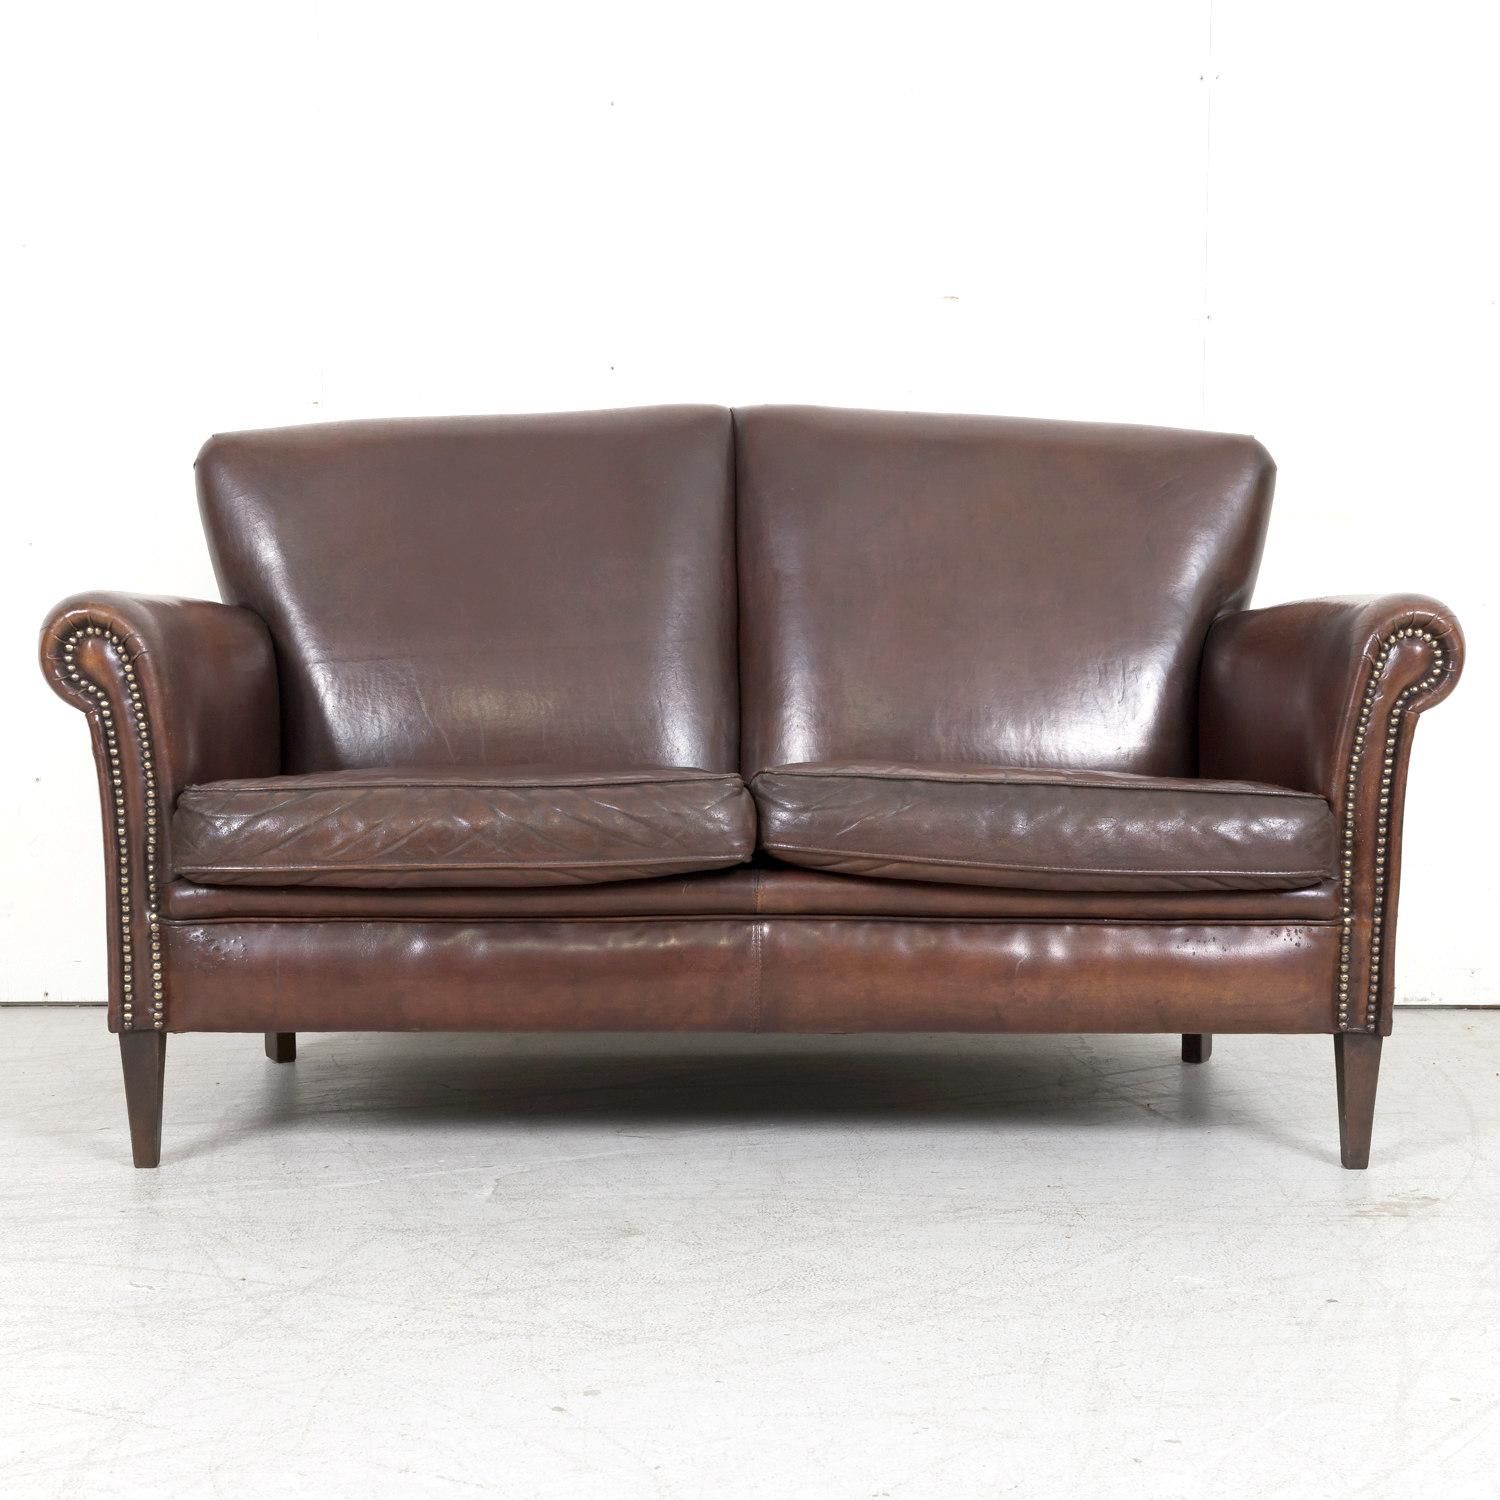 20th Century French Art Deco Settee or Sofa in Original Dark Brown Leather For Sale 1